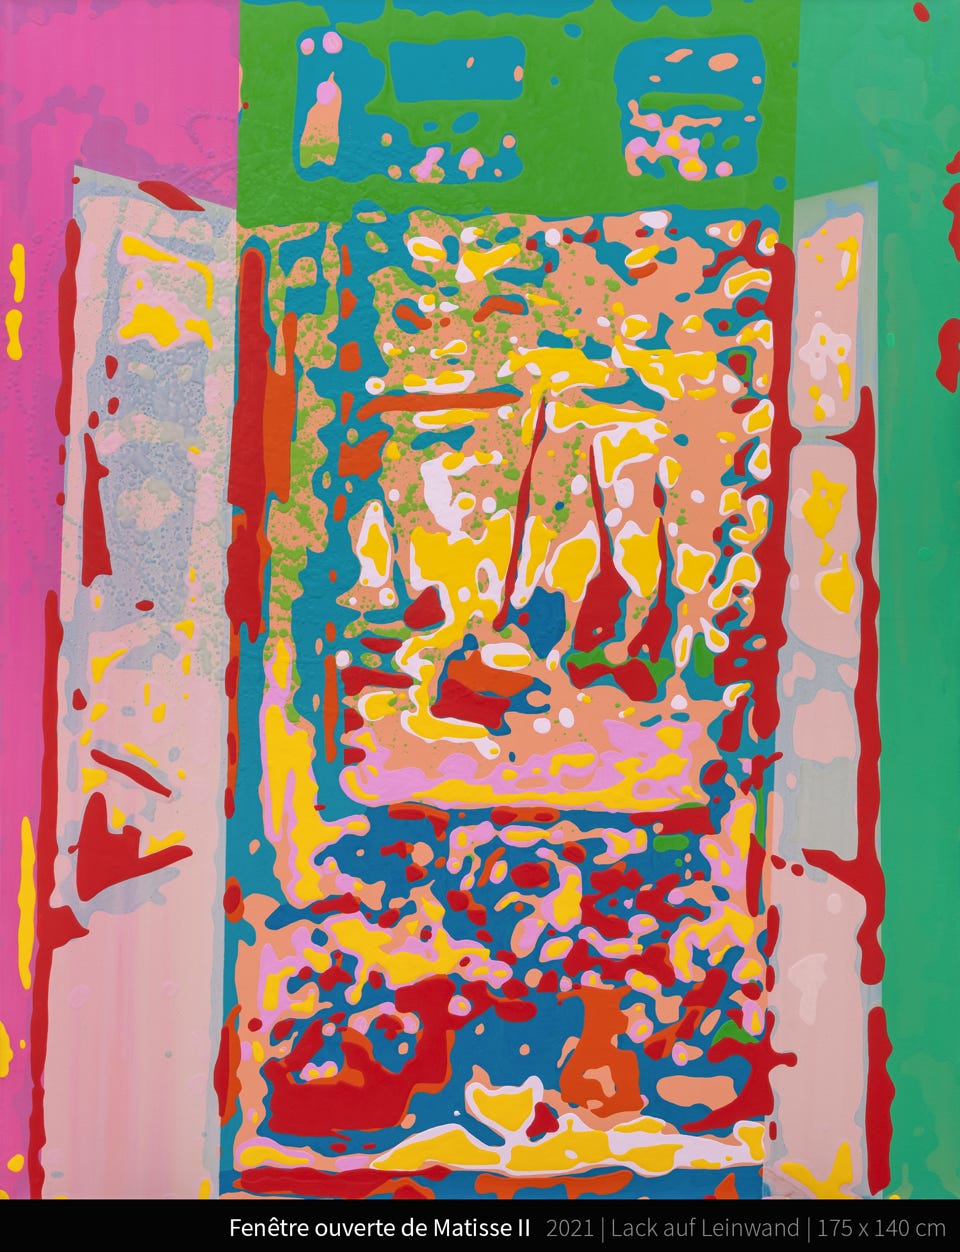 Fenêtre ouverte de Matisse II - The artist Henri Matisse continuously developed the motif of the window as an interface between the inner and outer realms throughout his life. It plays a key role in his work, not least because the colors of nature penetrate through the window into the interior of the studio. Art historian Shirley Blum examines more than fifty works of art-beginning with the painting Studio Under the Eaves (1903) and ending with Chapel of the Rosary in Vence (1951)-to trace in detail the significance of the recurring motif in Matisse's work. In this respect, her explanations not only trace the development of his window paintings, but at the same time open up an overview of the stages of this artist who created some of the most innovative abstract paintings of the 20th century. Fauvism is assigned to a style of painting in art history. It arose from a movement within the French avant-garde at the beginning of the 20th century. Fauvism forms the first movement of classical modernism. The main representatives of the initially reviled movement were Henri Matisse, André Derain and Maurice de Vlaminck. They were joined by Raoul Dufy, Albert Marquet, Kees van Dongen, Othon Friesz, and Georges Braque.[1][2] Some art historians also include Henri Manguin, Charles Camoin, Jean Puy, and Louis Valtat among the Fauves, and, according to more recent trends, Georges Rouault.[3] In the Fauvist paintings, the coloring was no longer intended to serve the illusionistic representation of an object. The painterly statement arose from the harmony of the color surfaces. Typical for most of the works are their bright colors. However, considerations of the representation of space are just as essential to the composition of the painting.[4][1] The roots of Fauvism stem from Impressionism, but the goal was to counteract the fleeting nature of Impressionist paintings in order to give the work more duration (French durée). Fauvism did not have its own theory or manifesto. According to a more recent view, Fauvism had similarities with Expressionism.